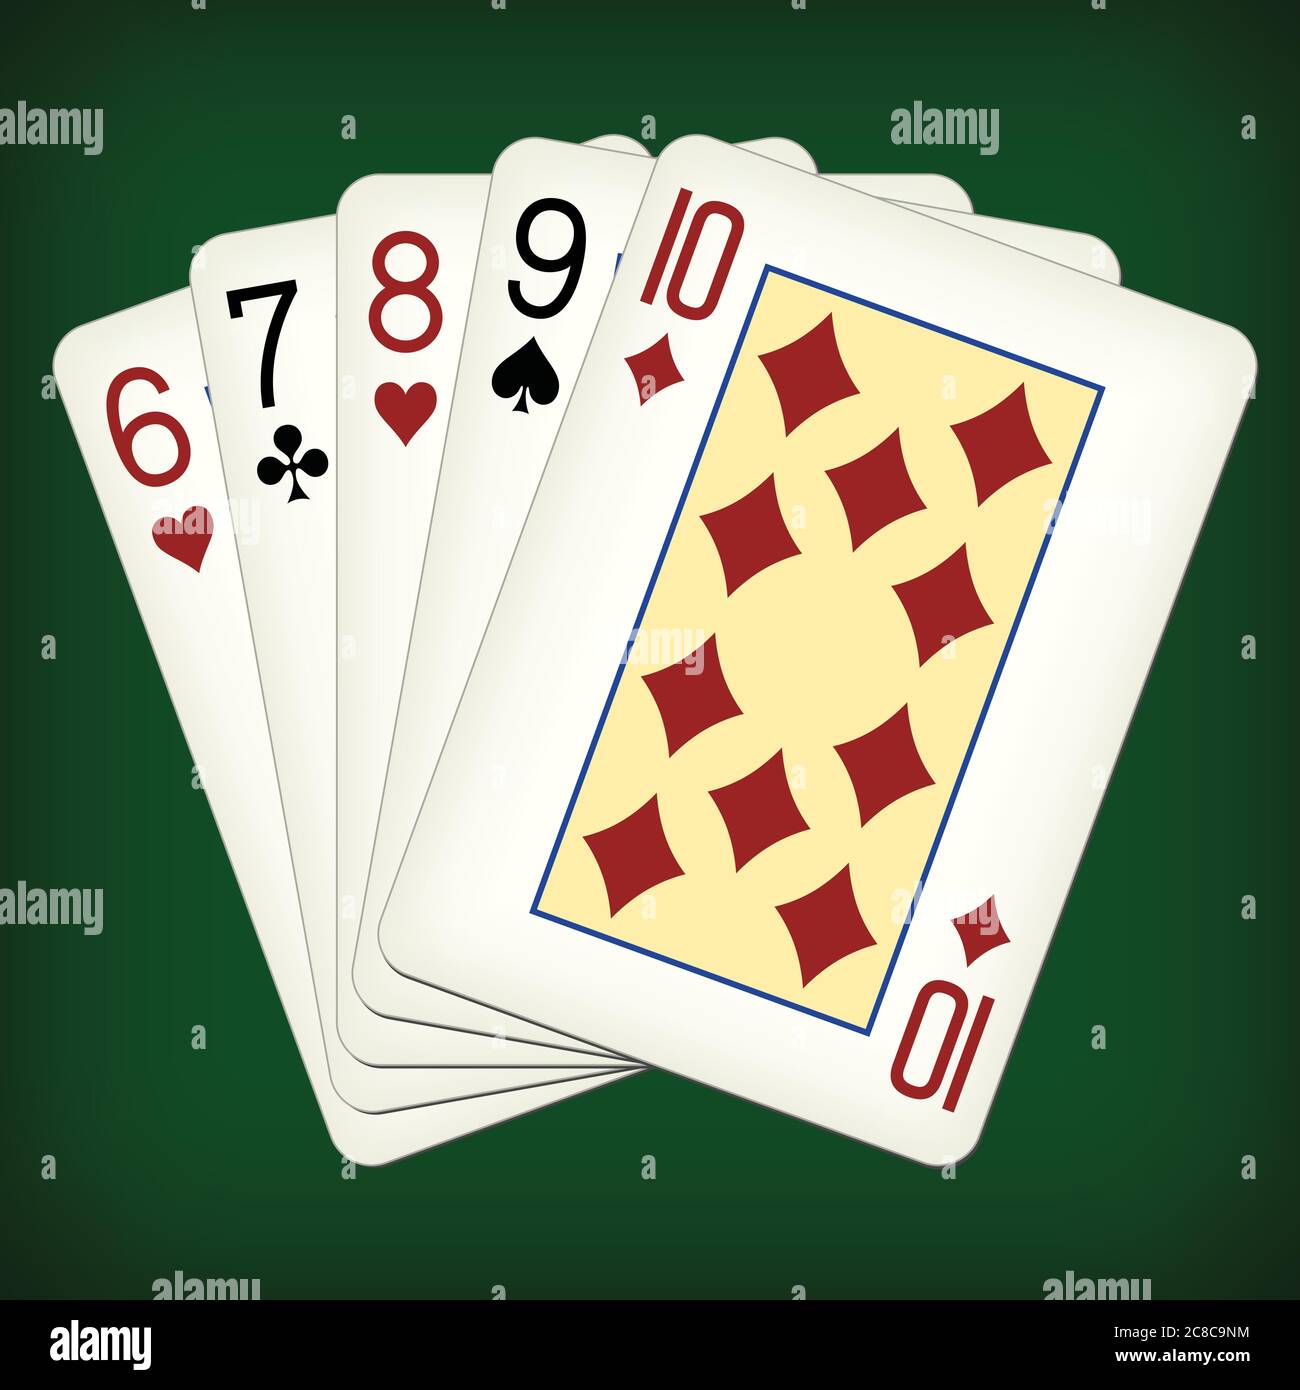 Straight from Six to Ten - playing cards vector illustration Stock Vector